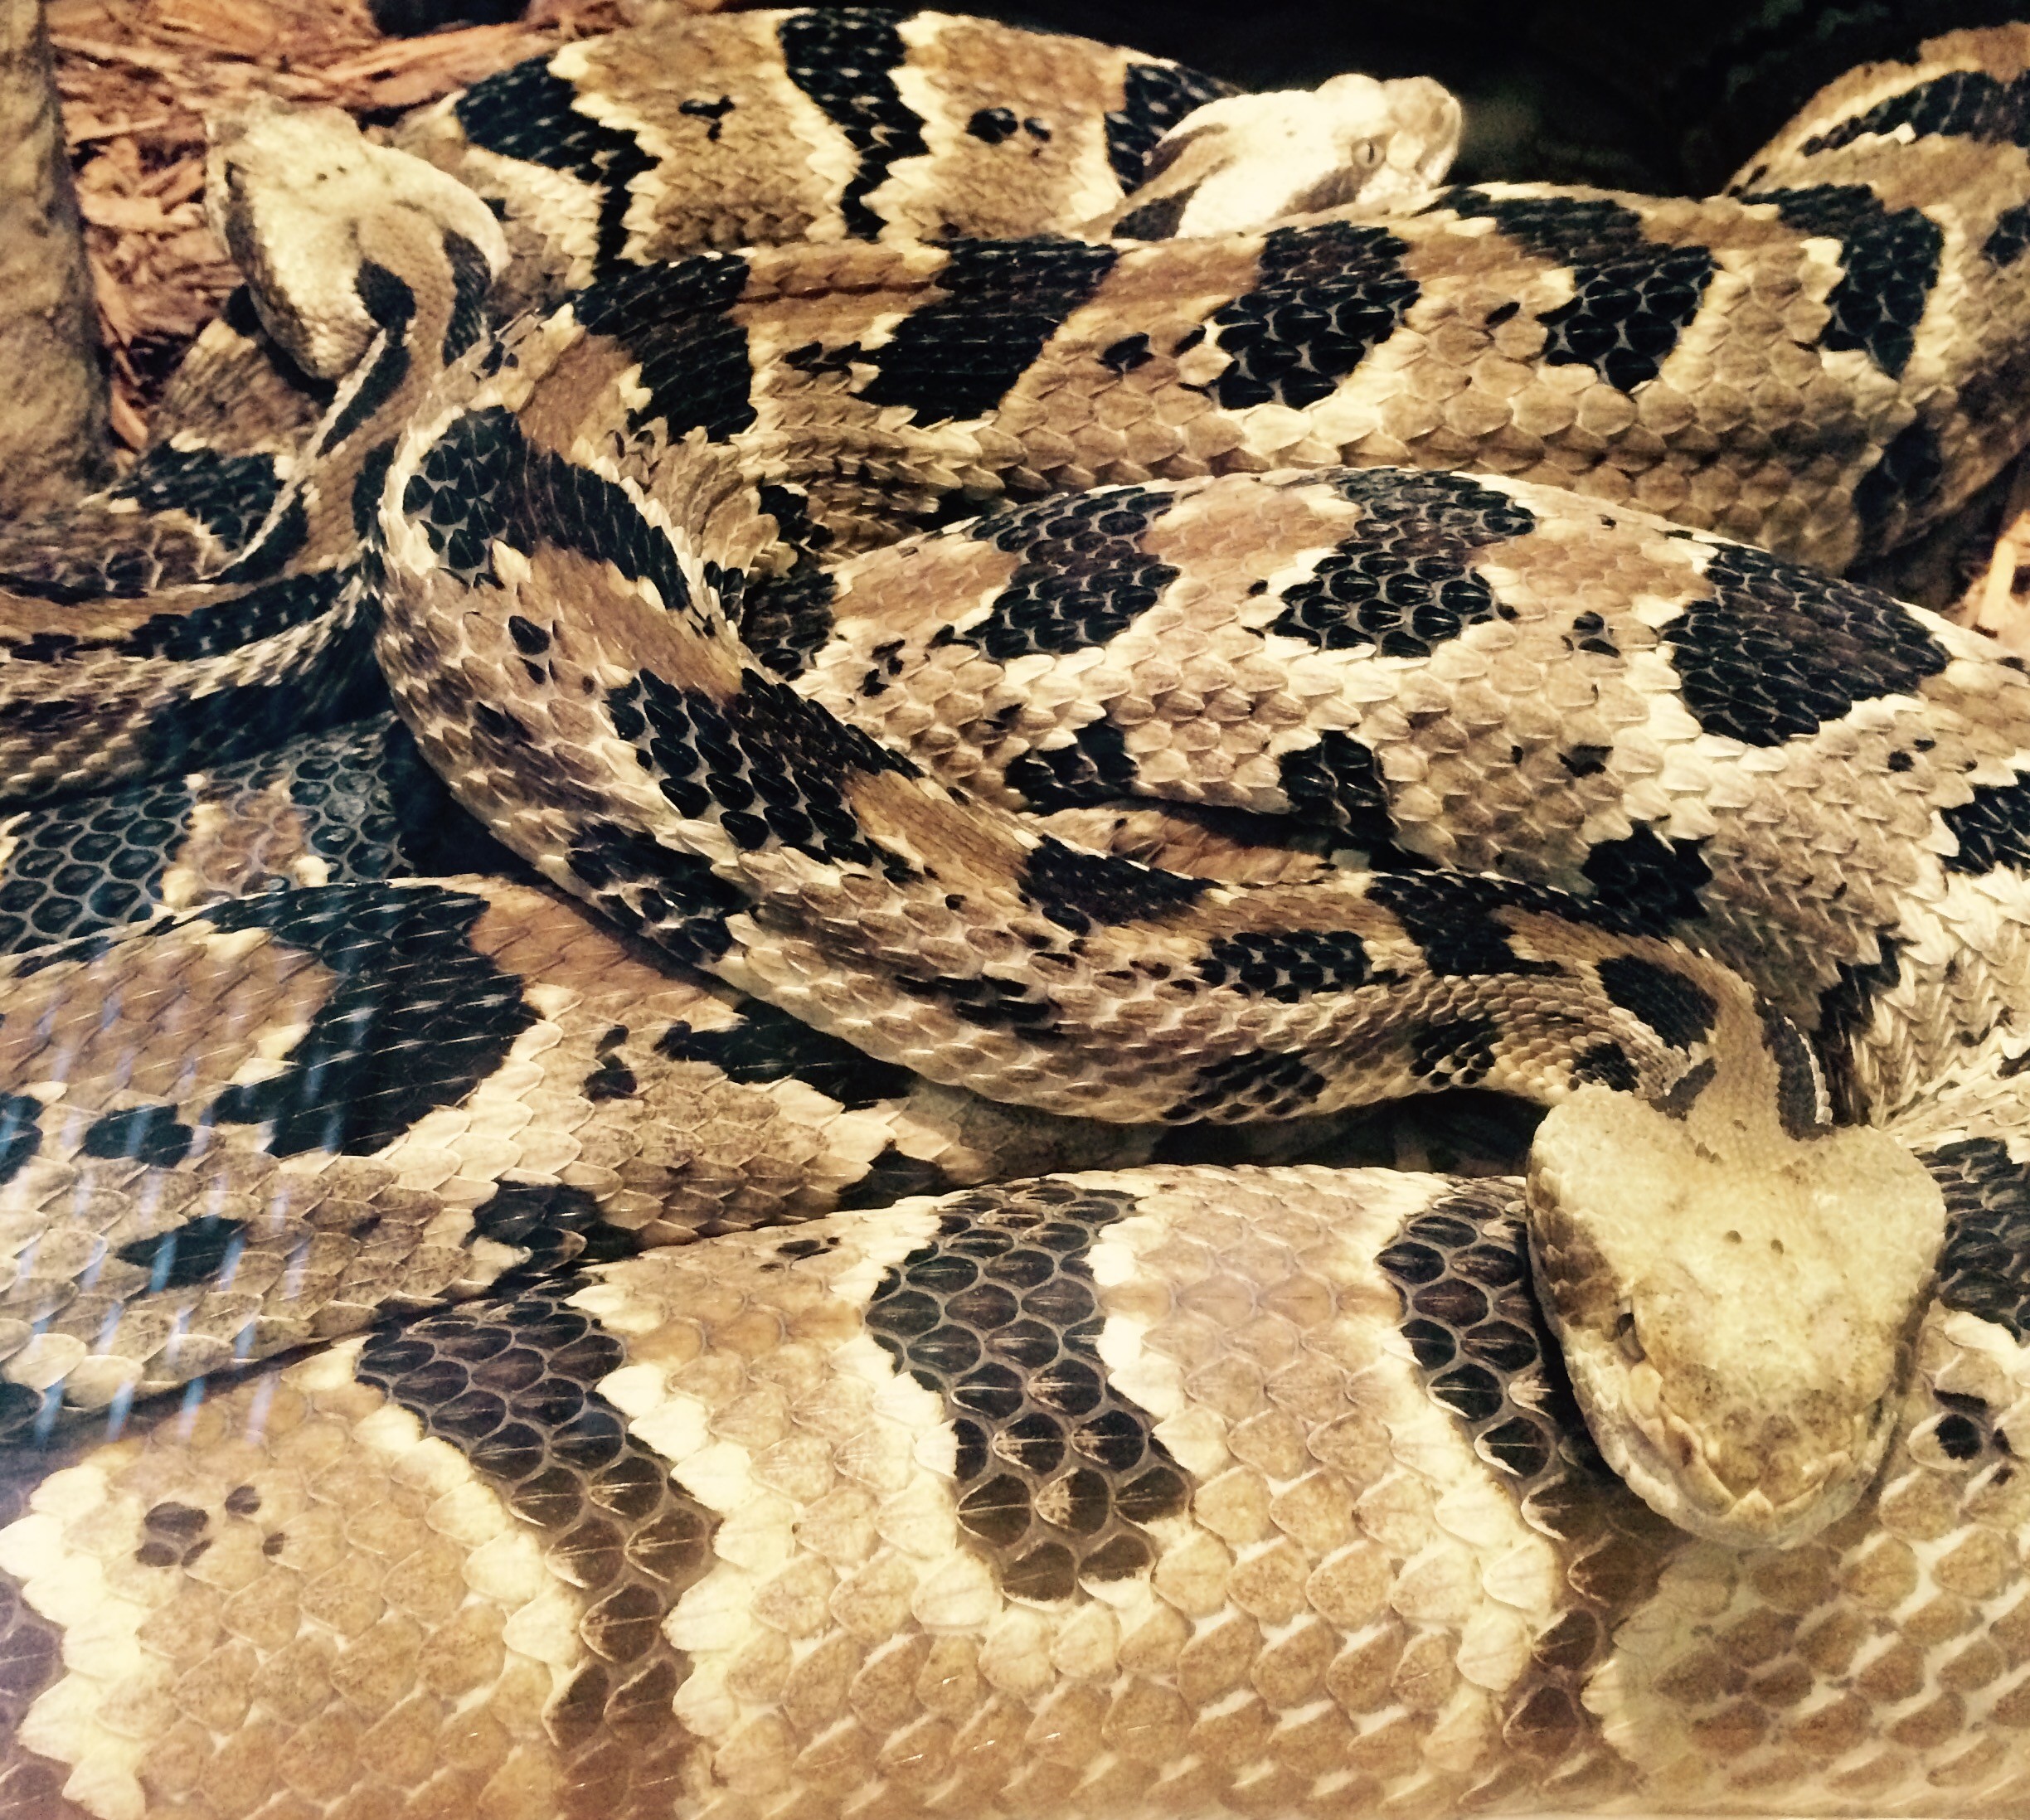 Wildlife Biologists Learning From Our Zoo’s Timber Rattlesnakes